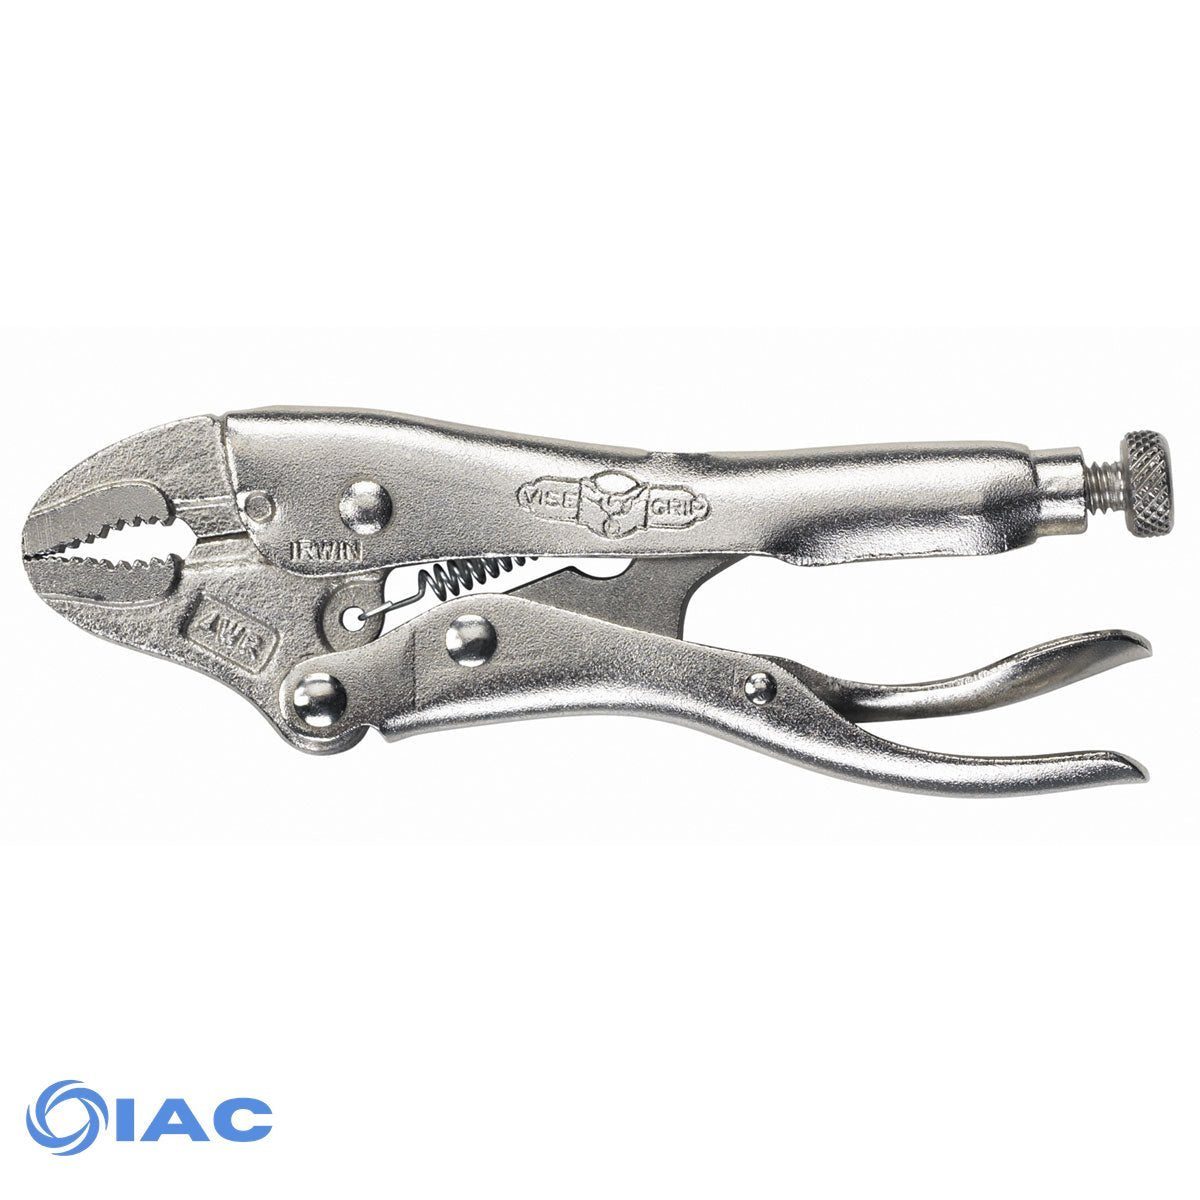 Irwin 10CR 10in Curved Jaw Locking Plier CODE: VIS10508017